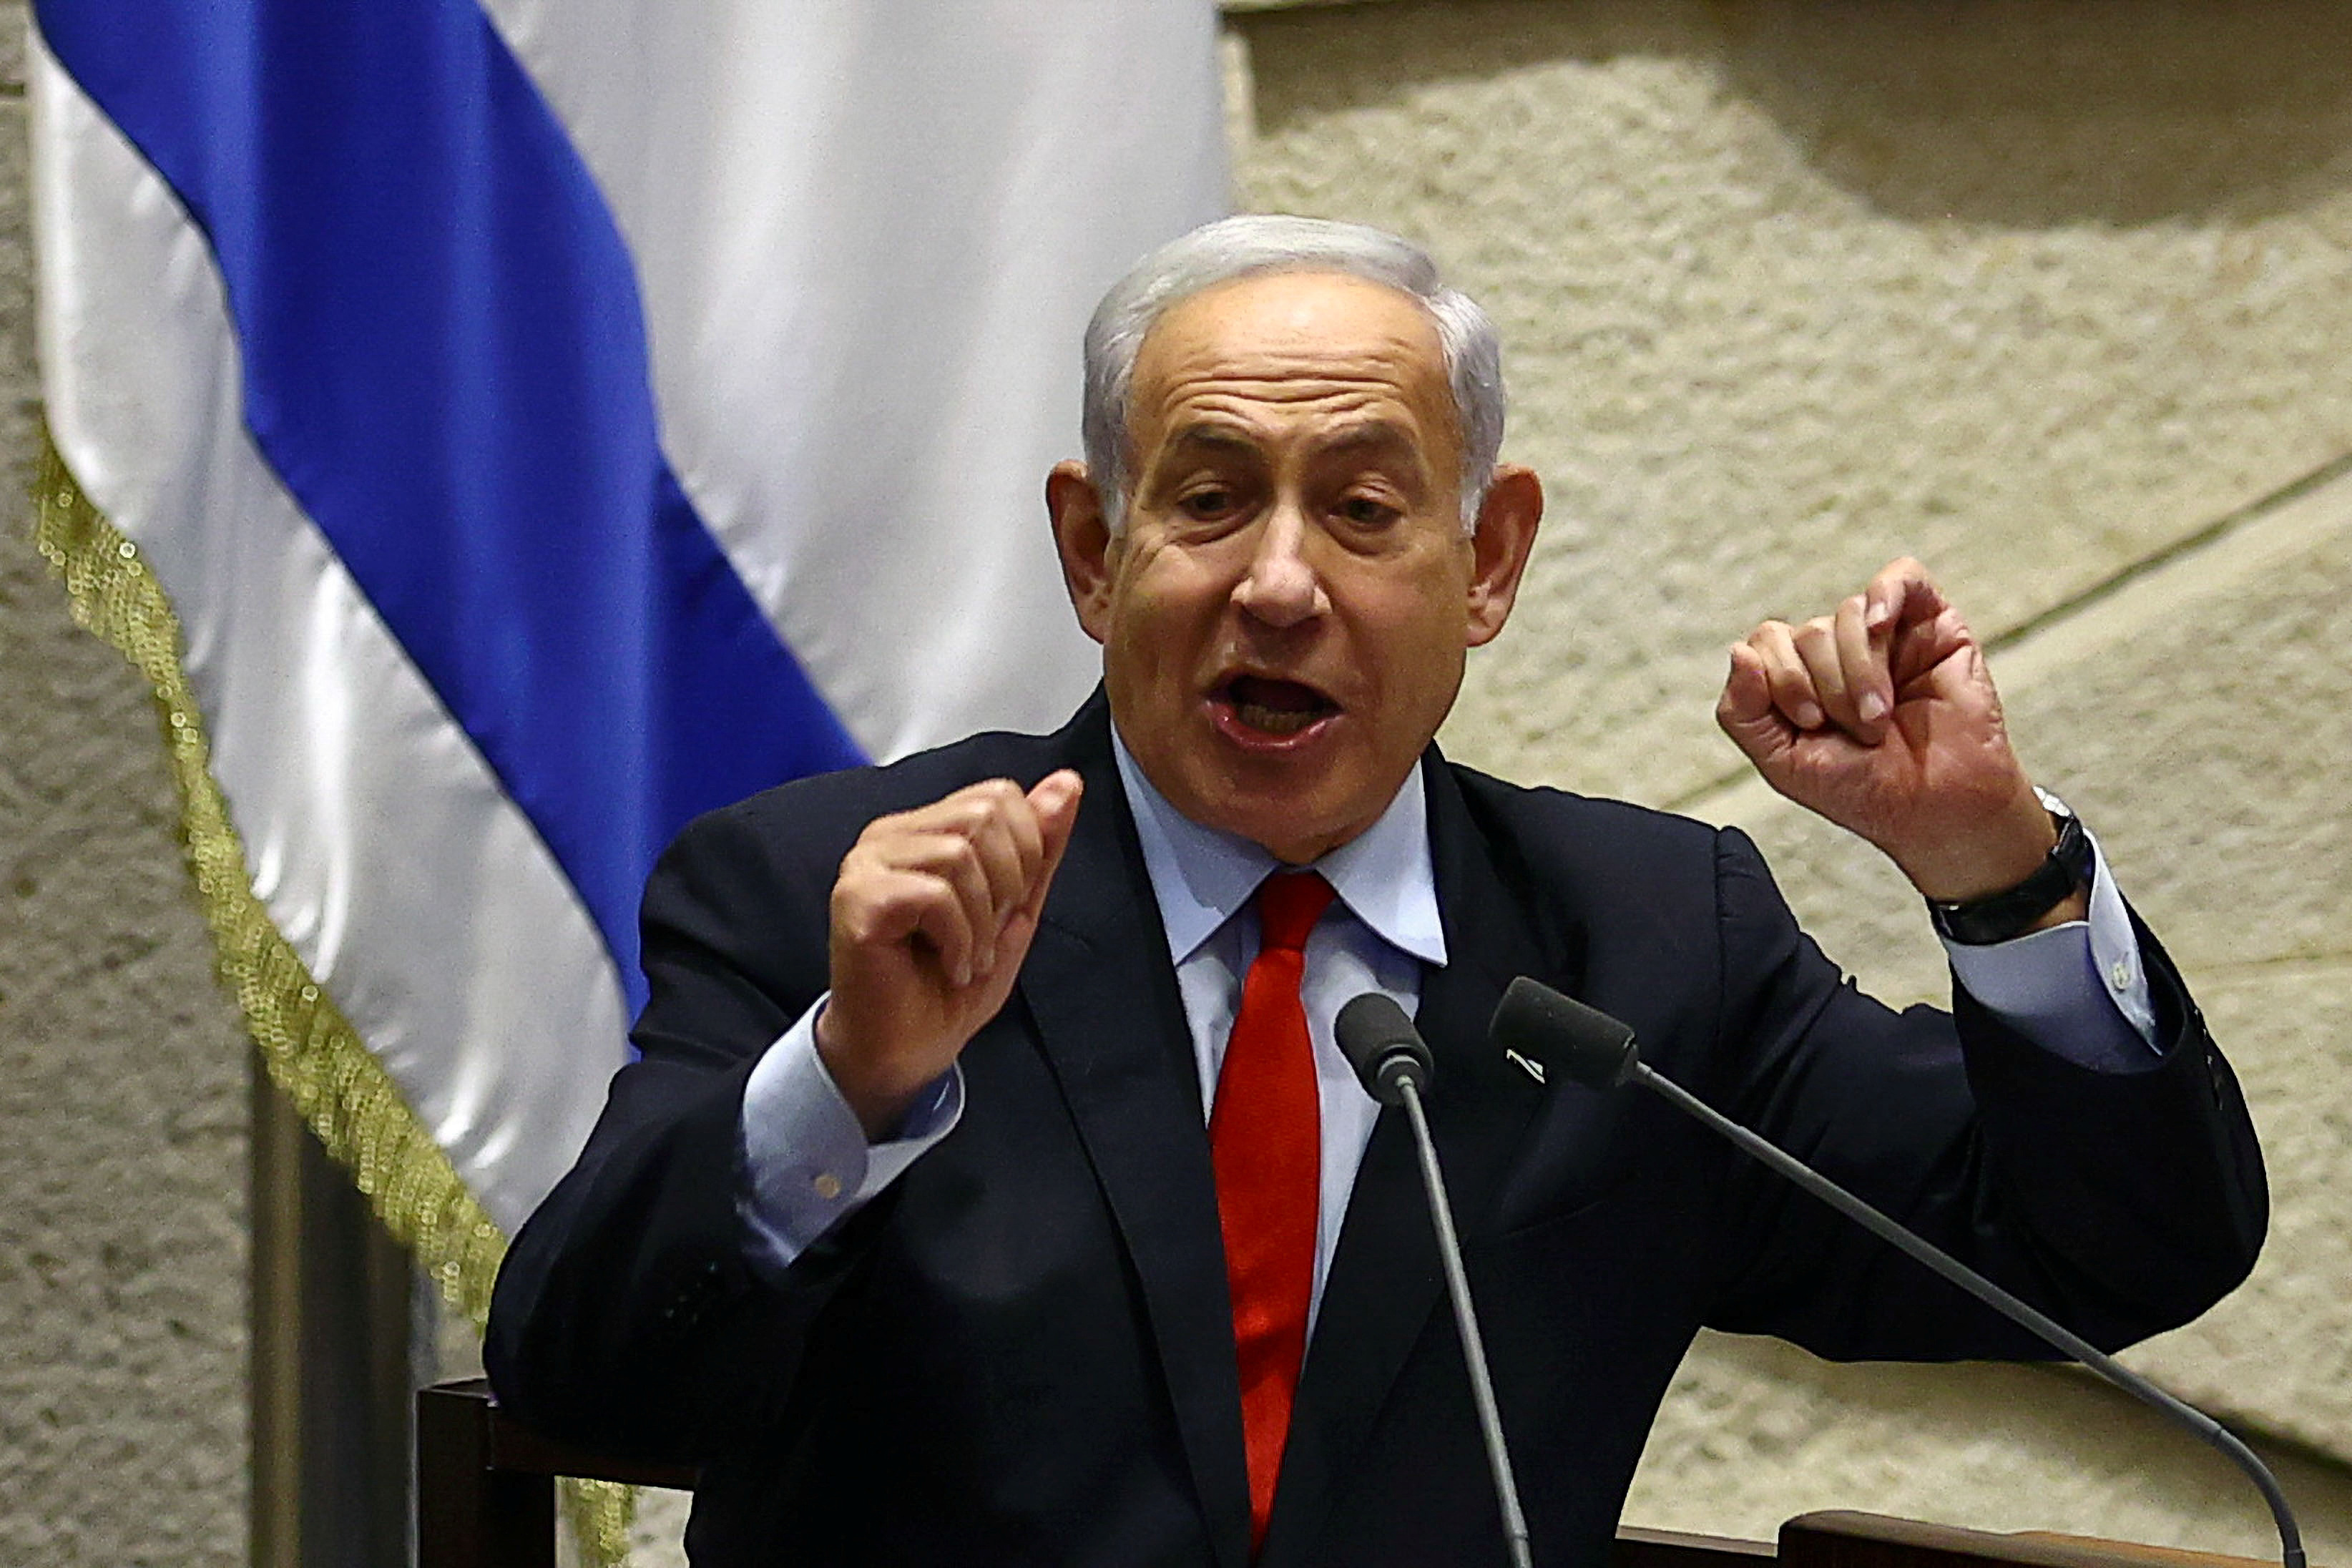 Israeli Prime Minister Benjamin Netanyahu attends a meeting at the Knesset